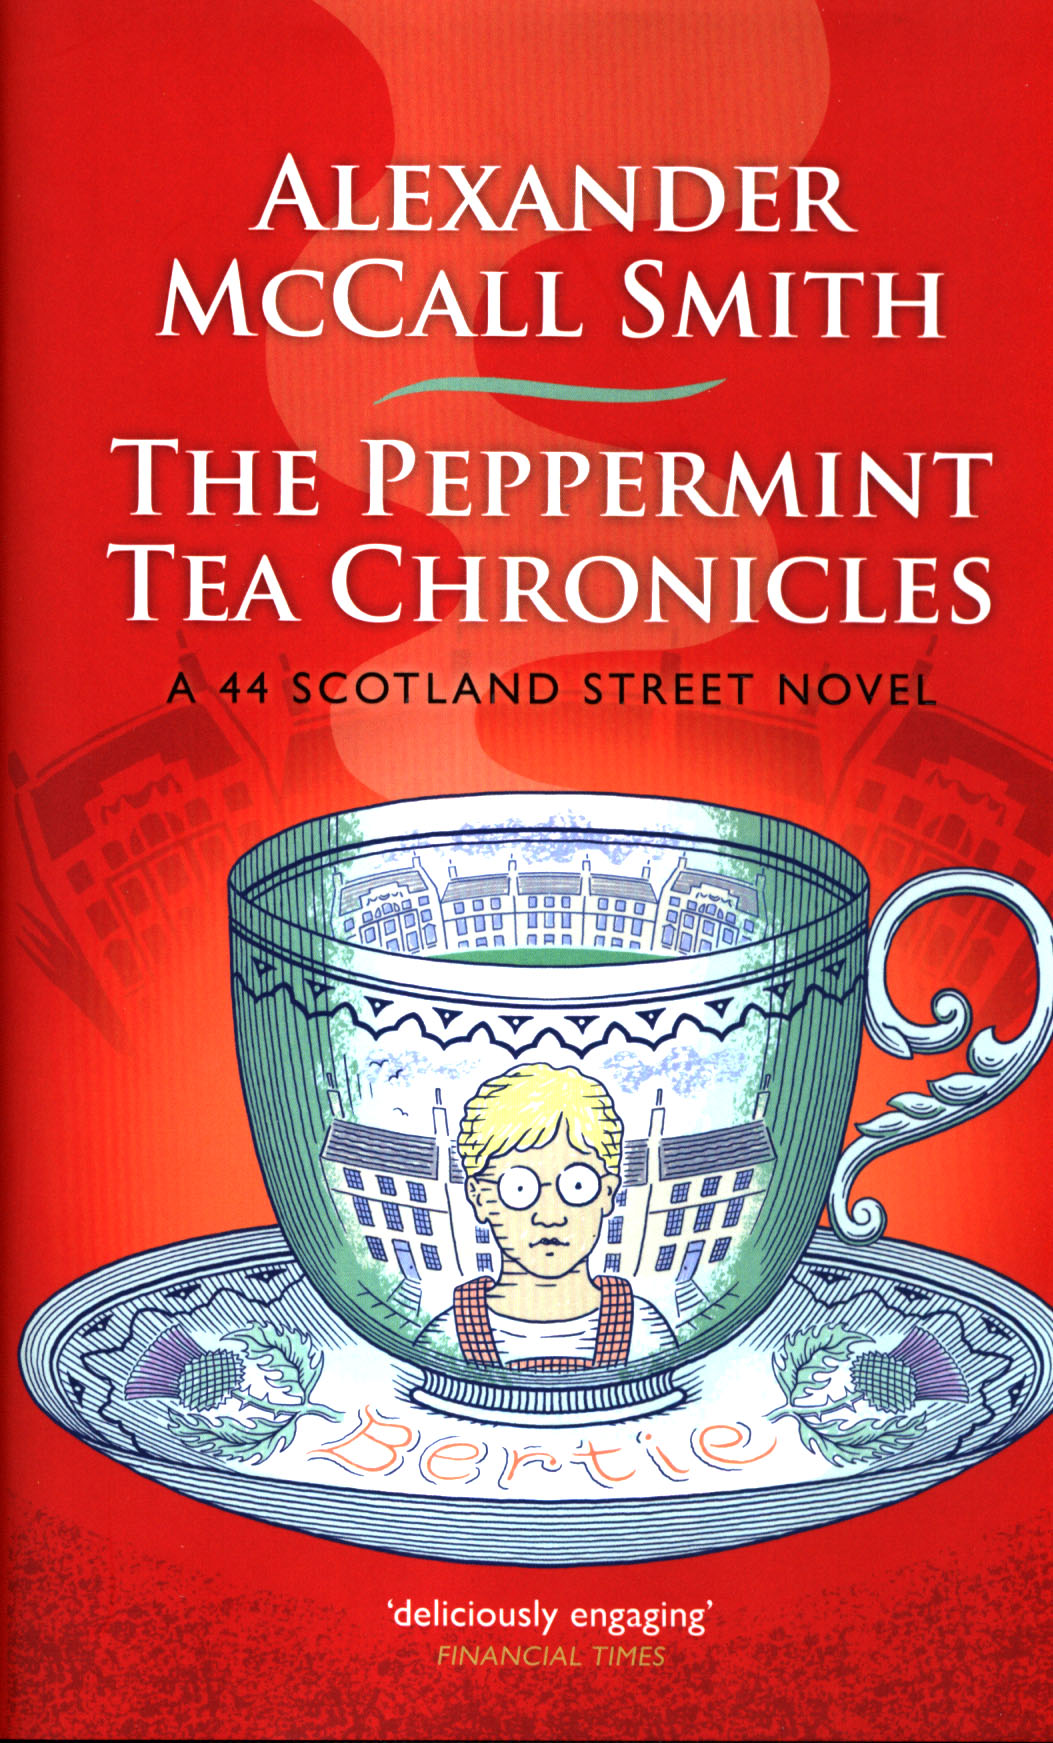 Image for "The Peppermint Tea Chronicles"